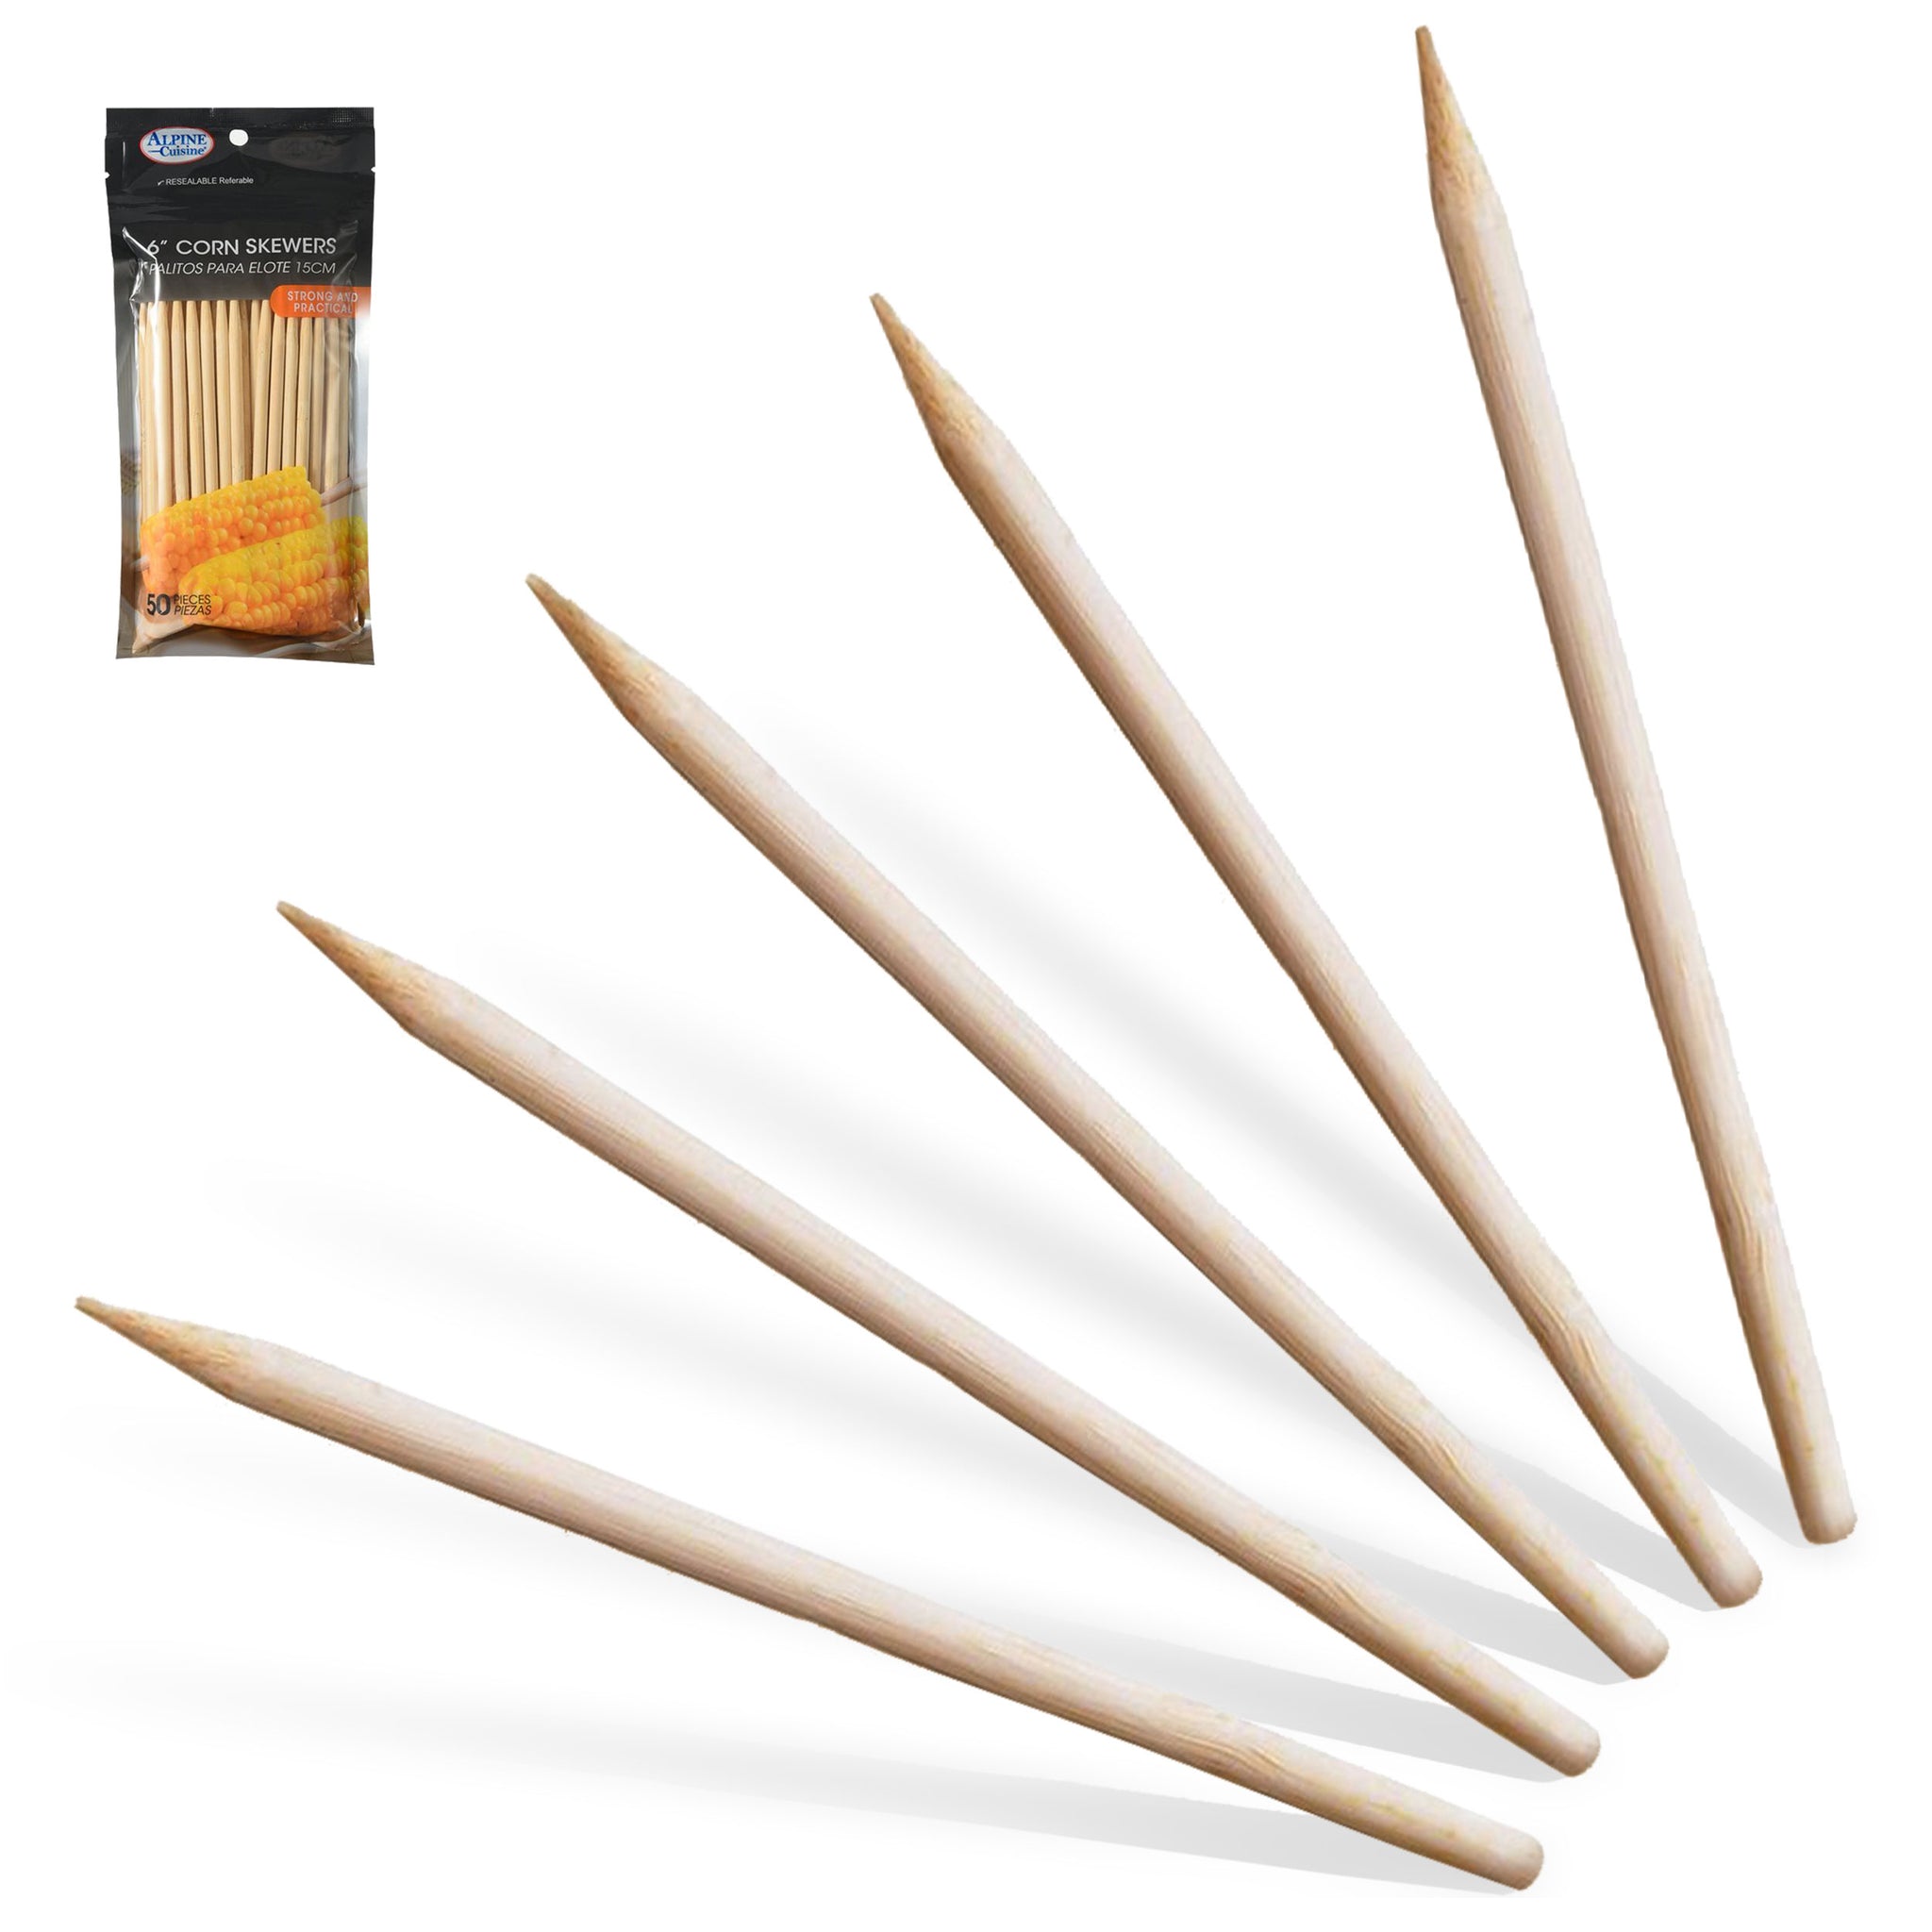 100 Pcs 12 inch Bamboo Skewers Wooden BBQ Sticks for Shish Grill